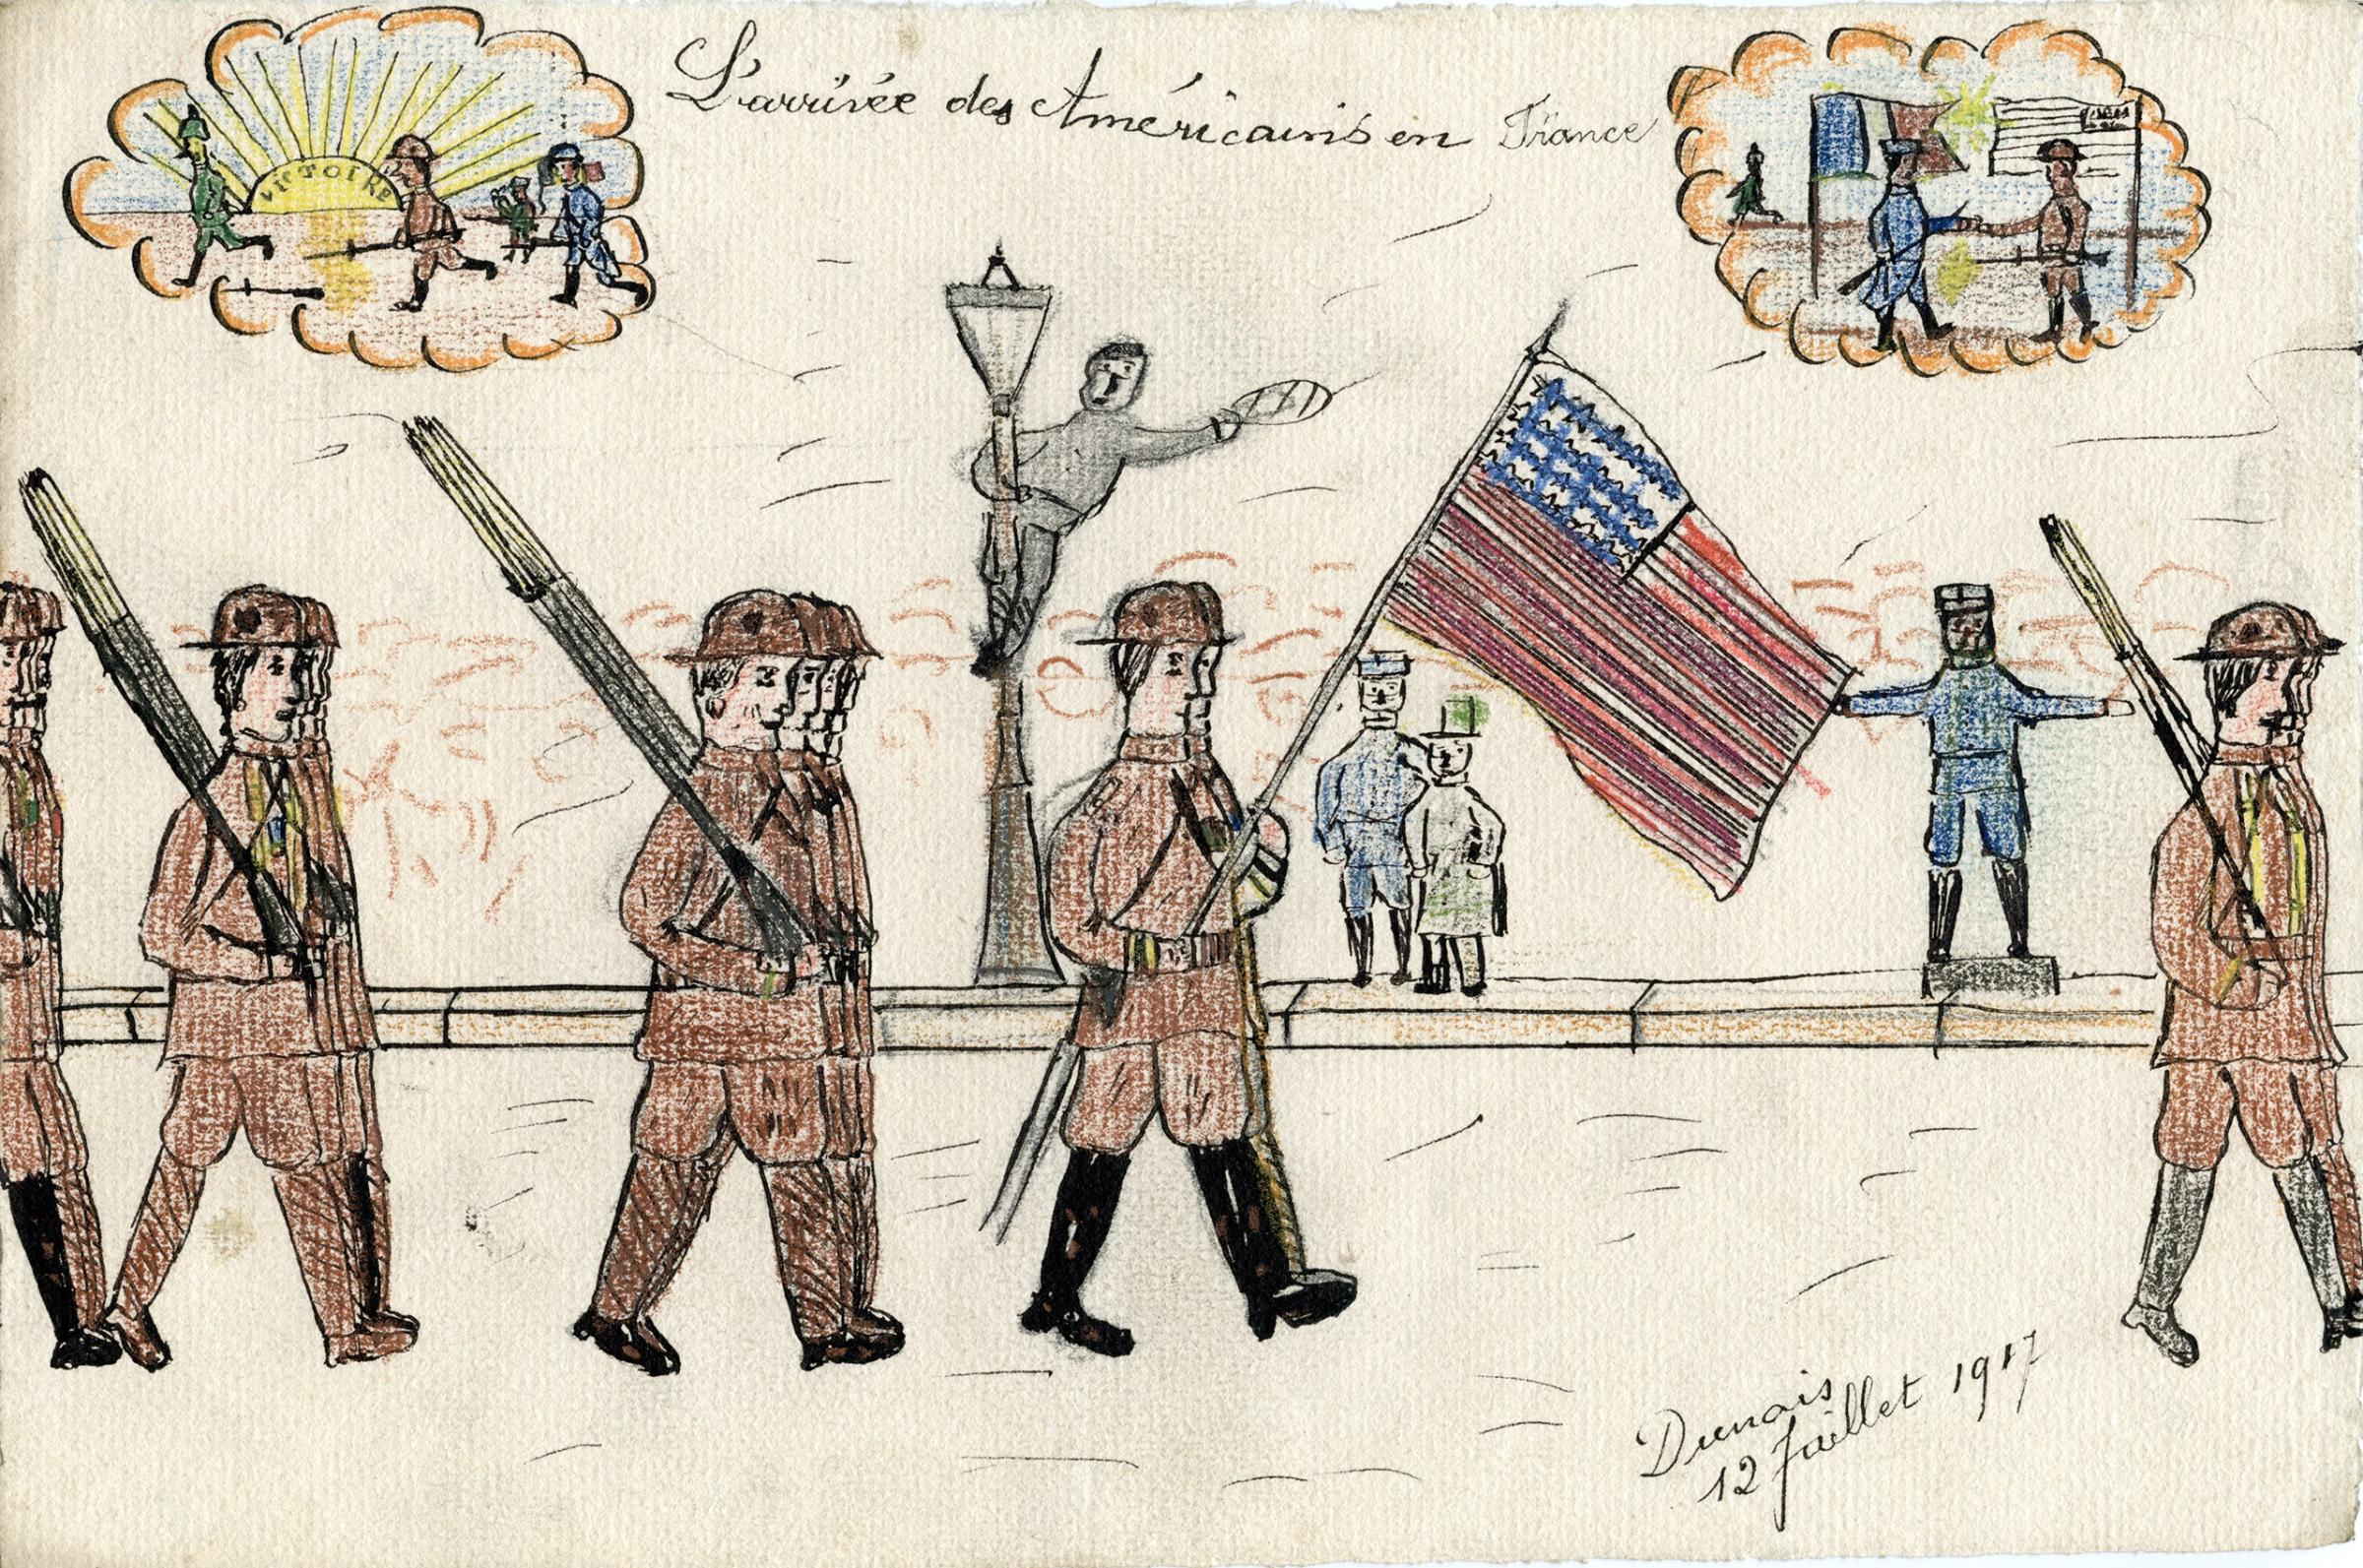 Drawings by French school children after the Americans landed in France in 1917.